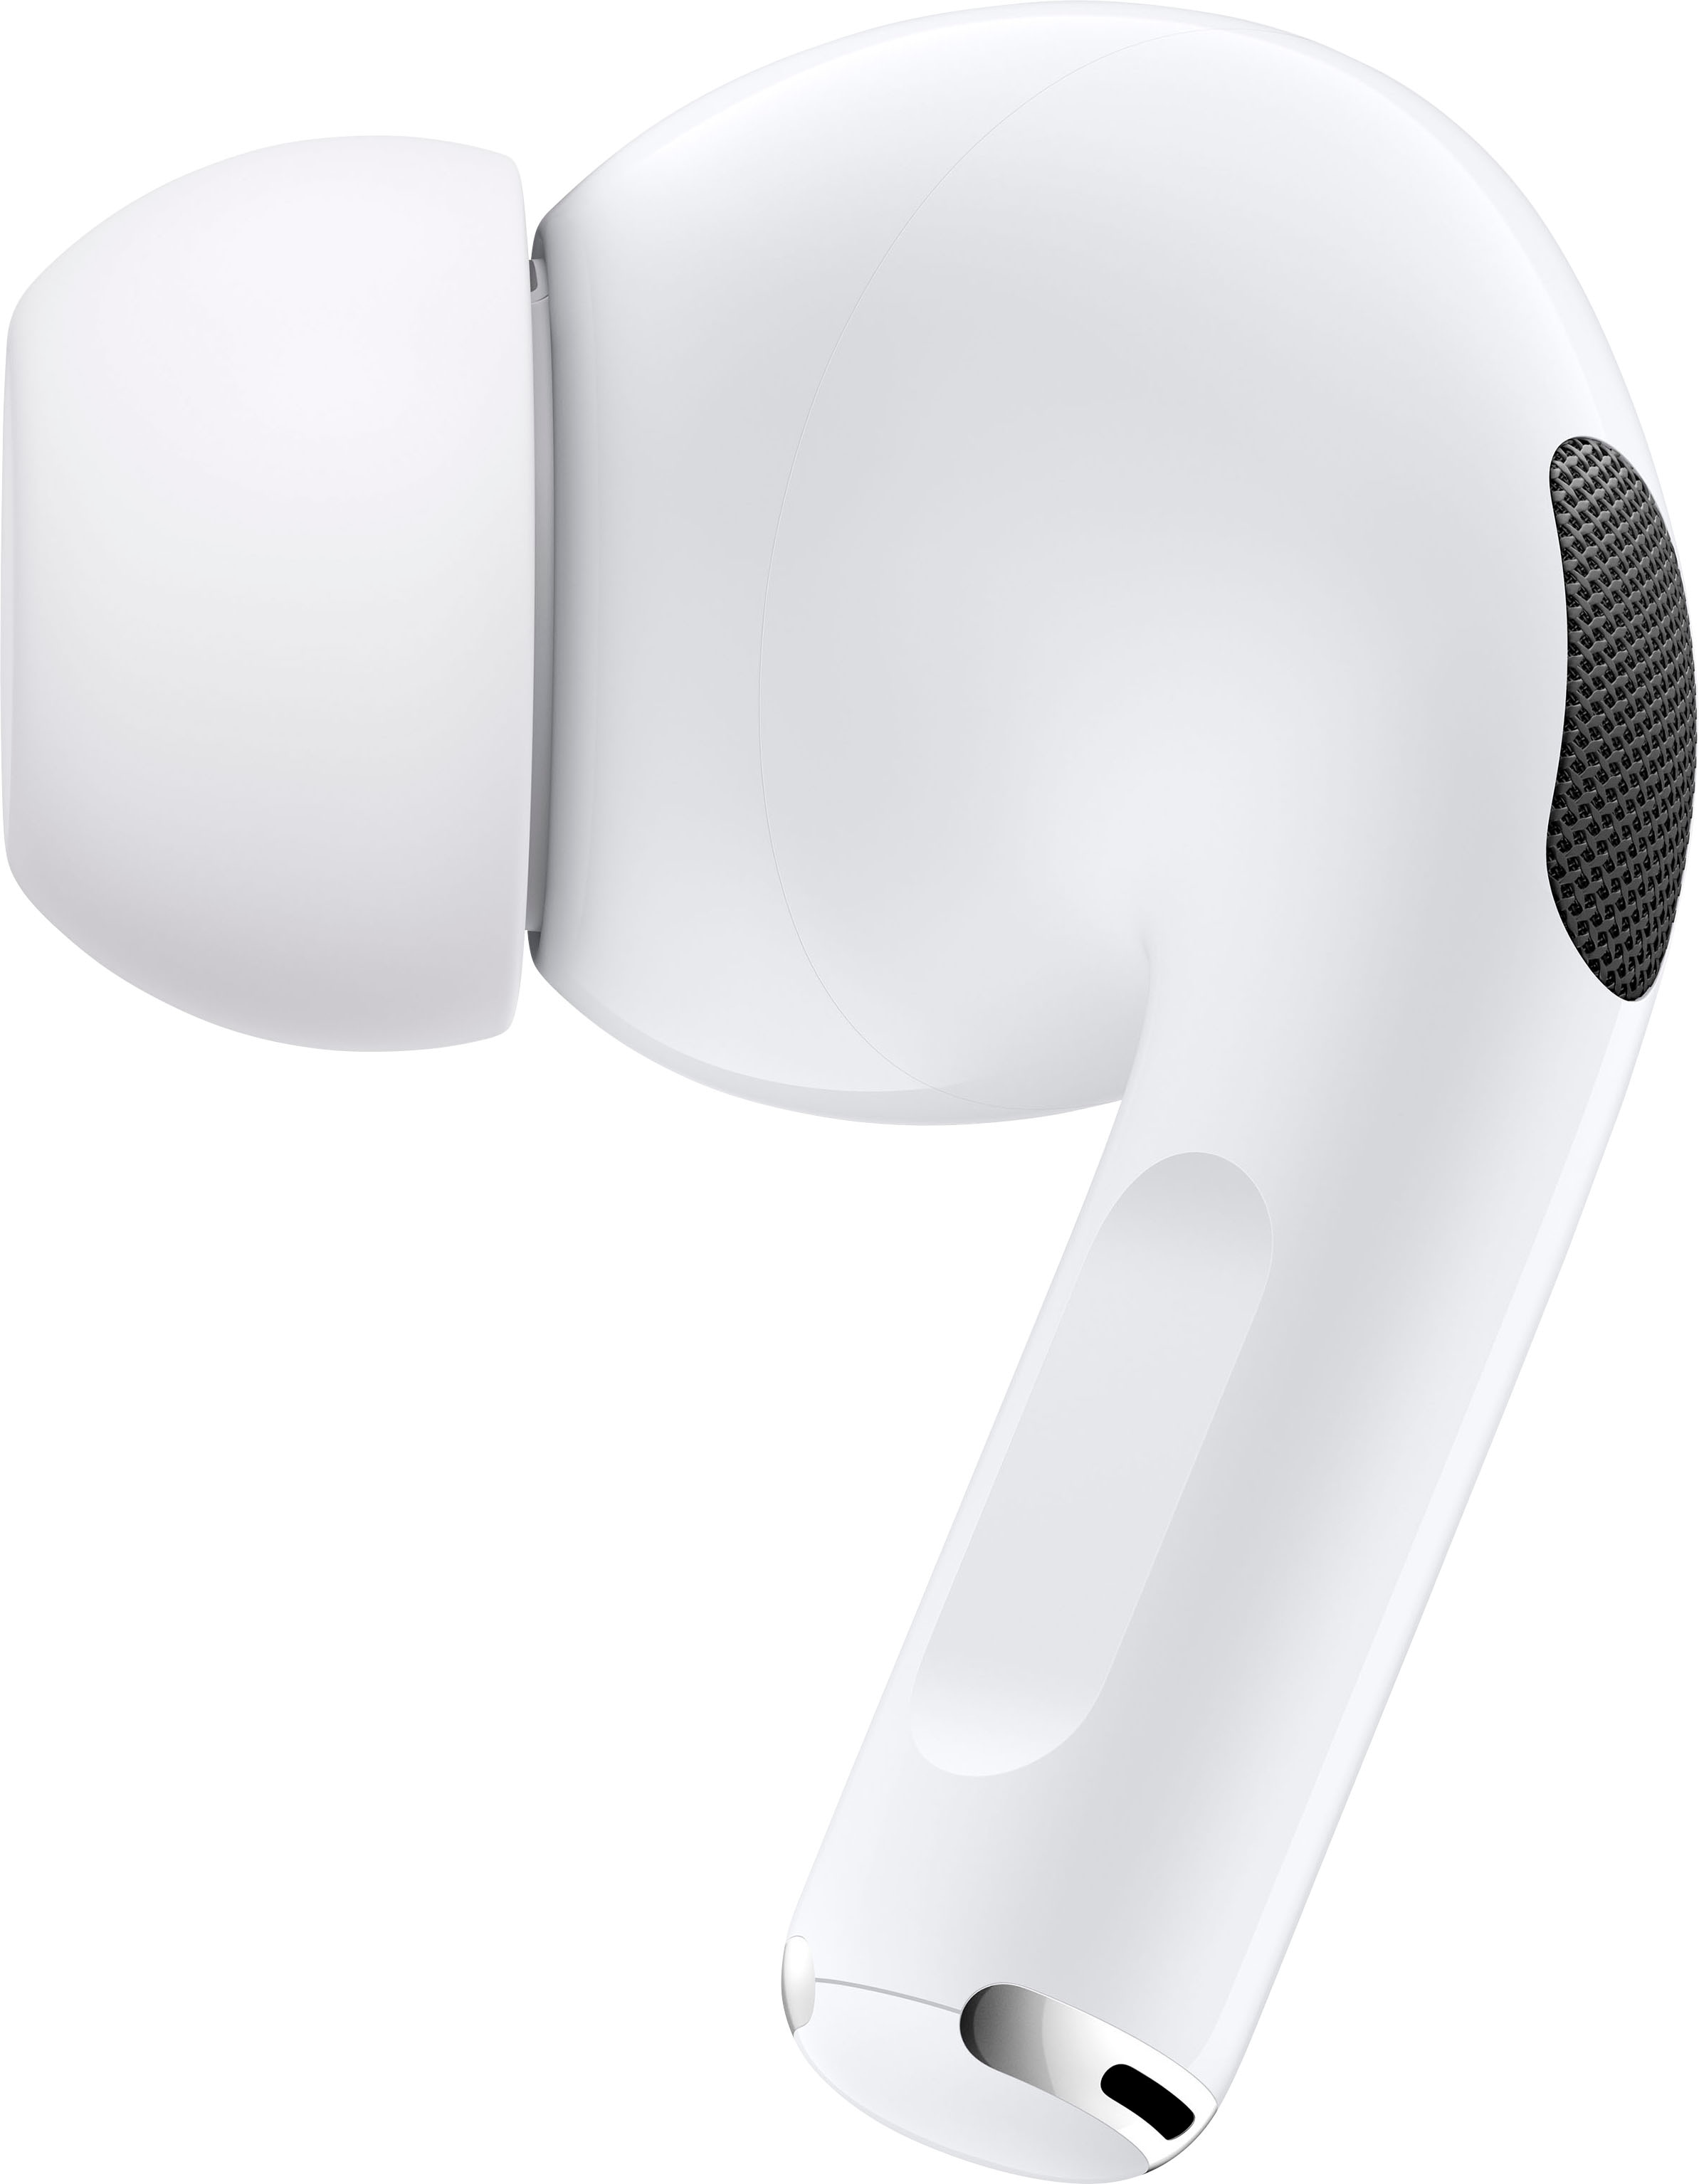 AirPods Pro ホワイト MWP22ZM A